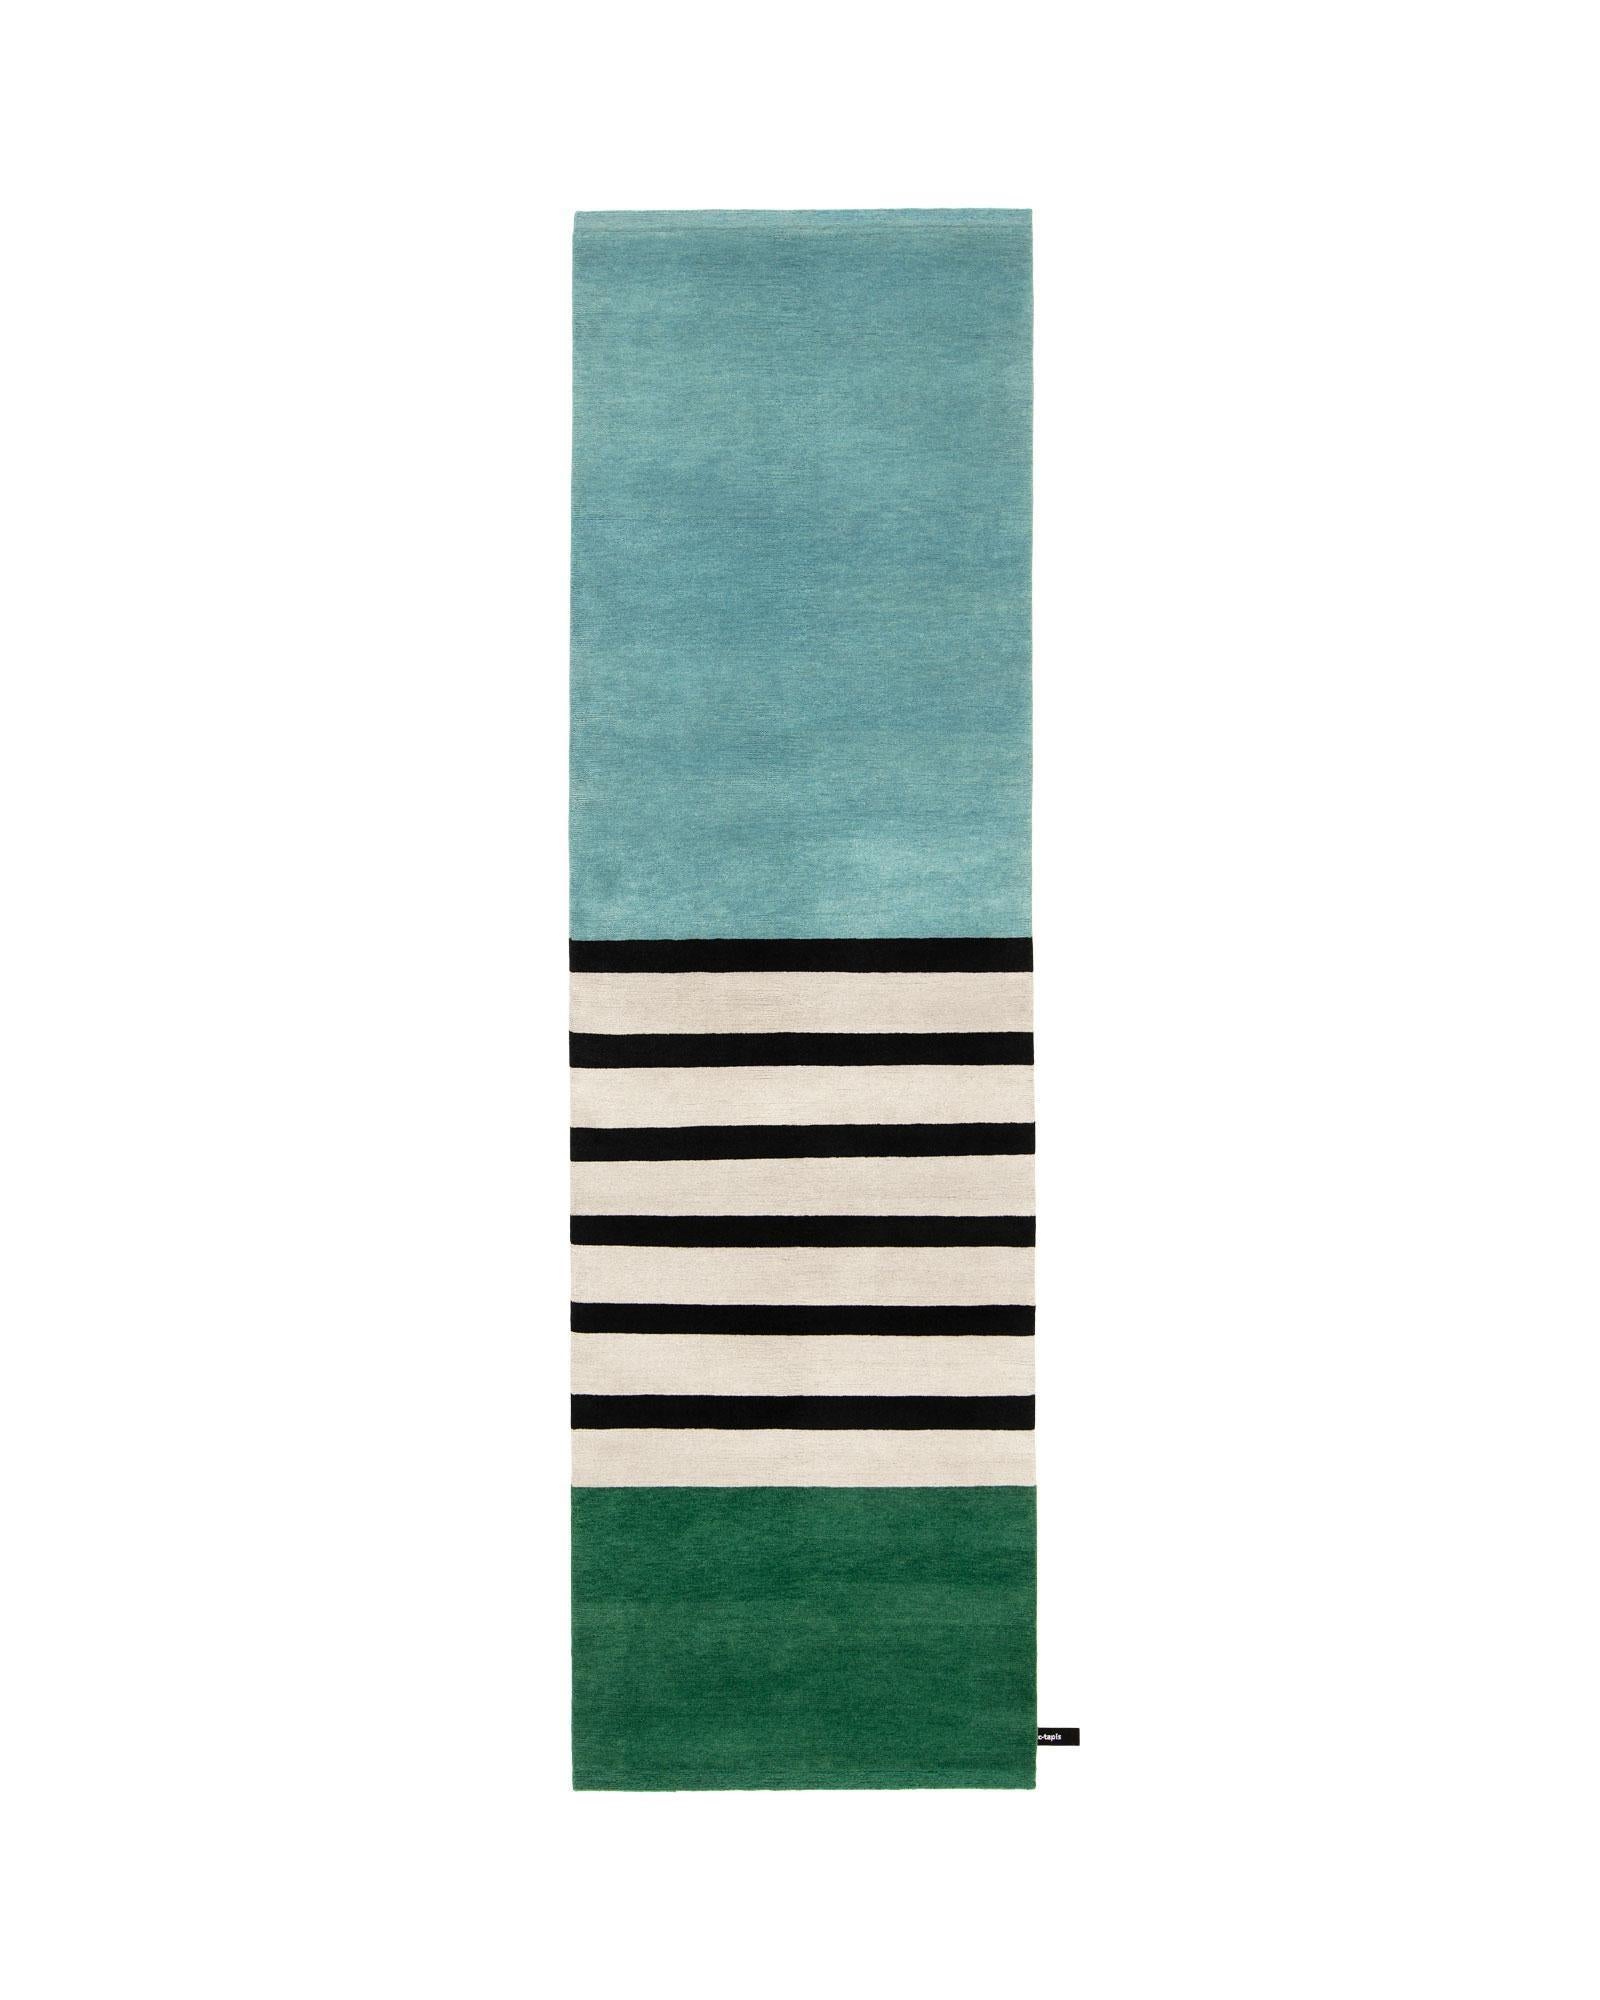 Nepalese cc-tapis Noir Gris Les Arcs Collection by Charlotte Perriand - IN STOCK For Sale